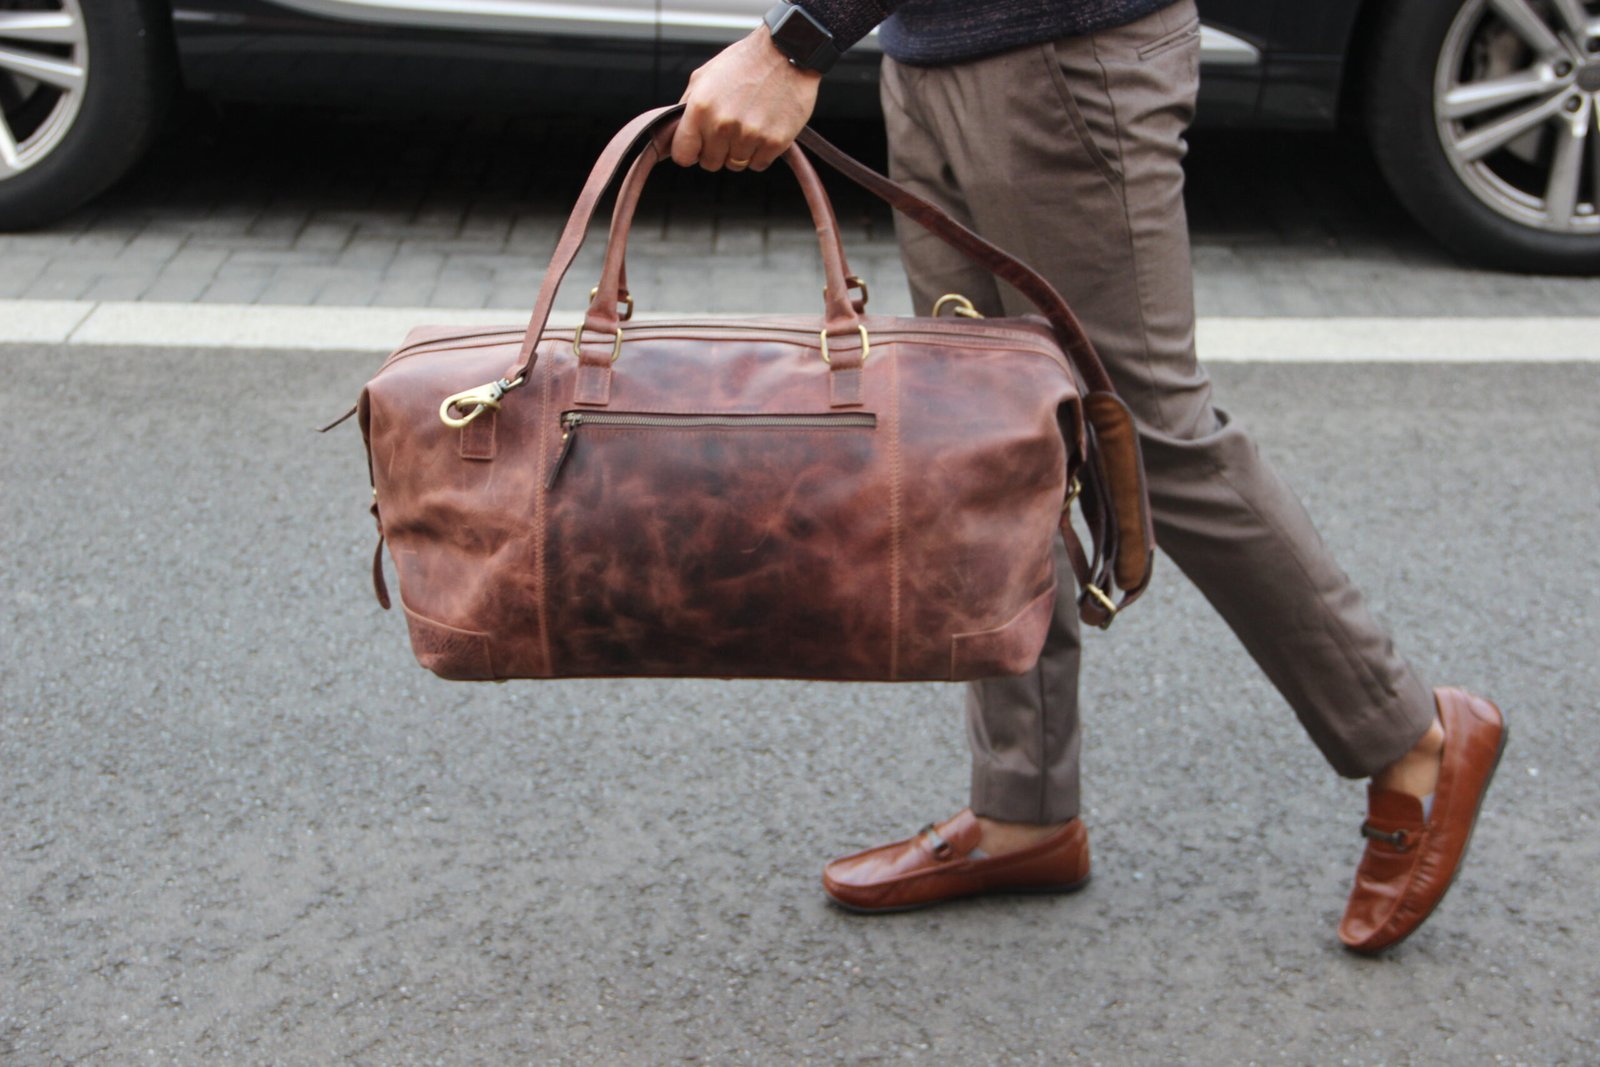 How to Choose the Perfect Travel Duffel Bag